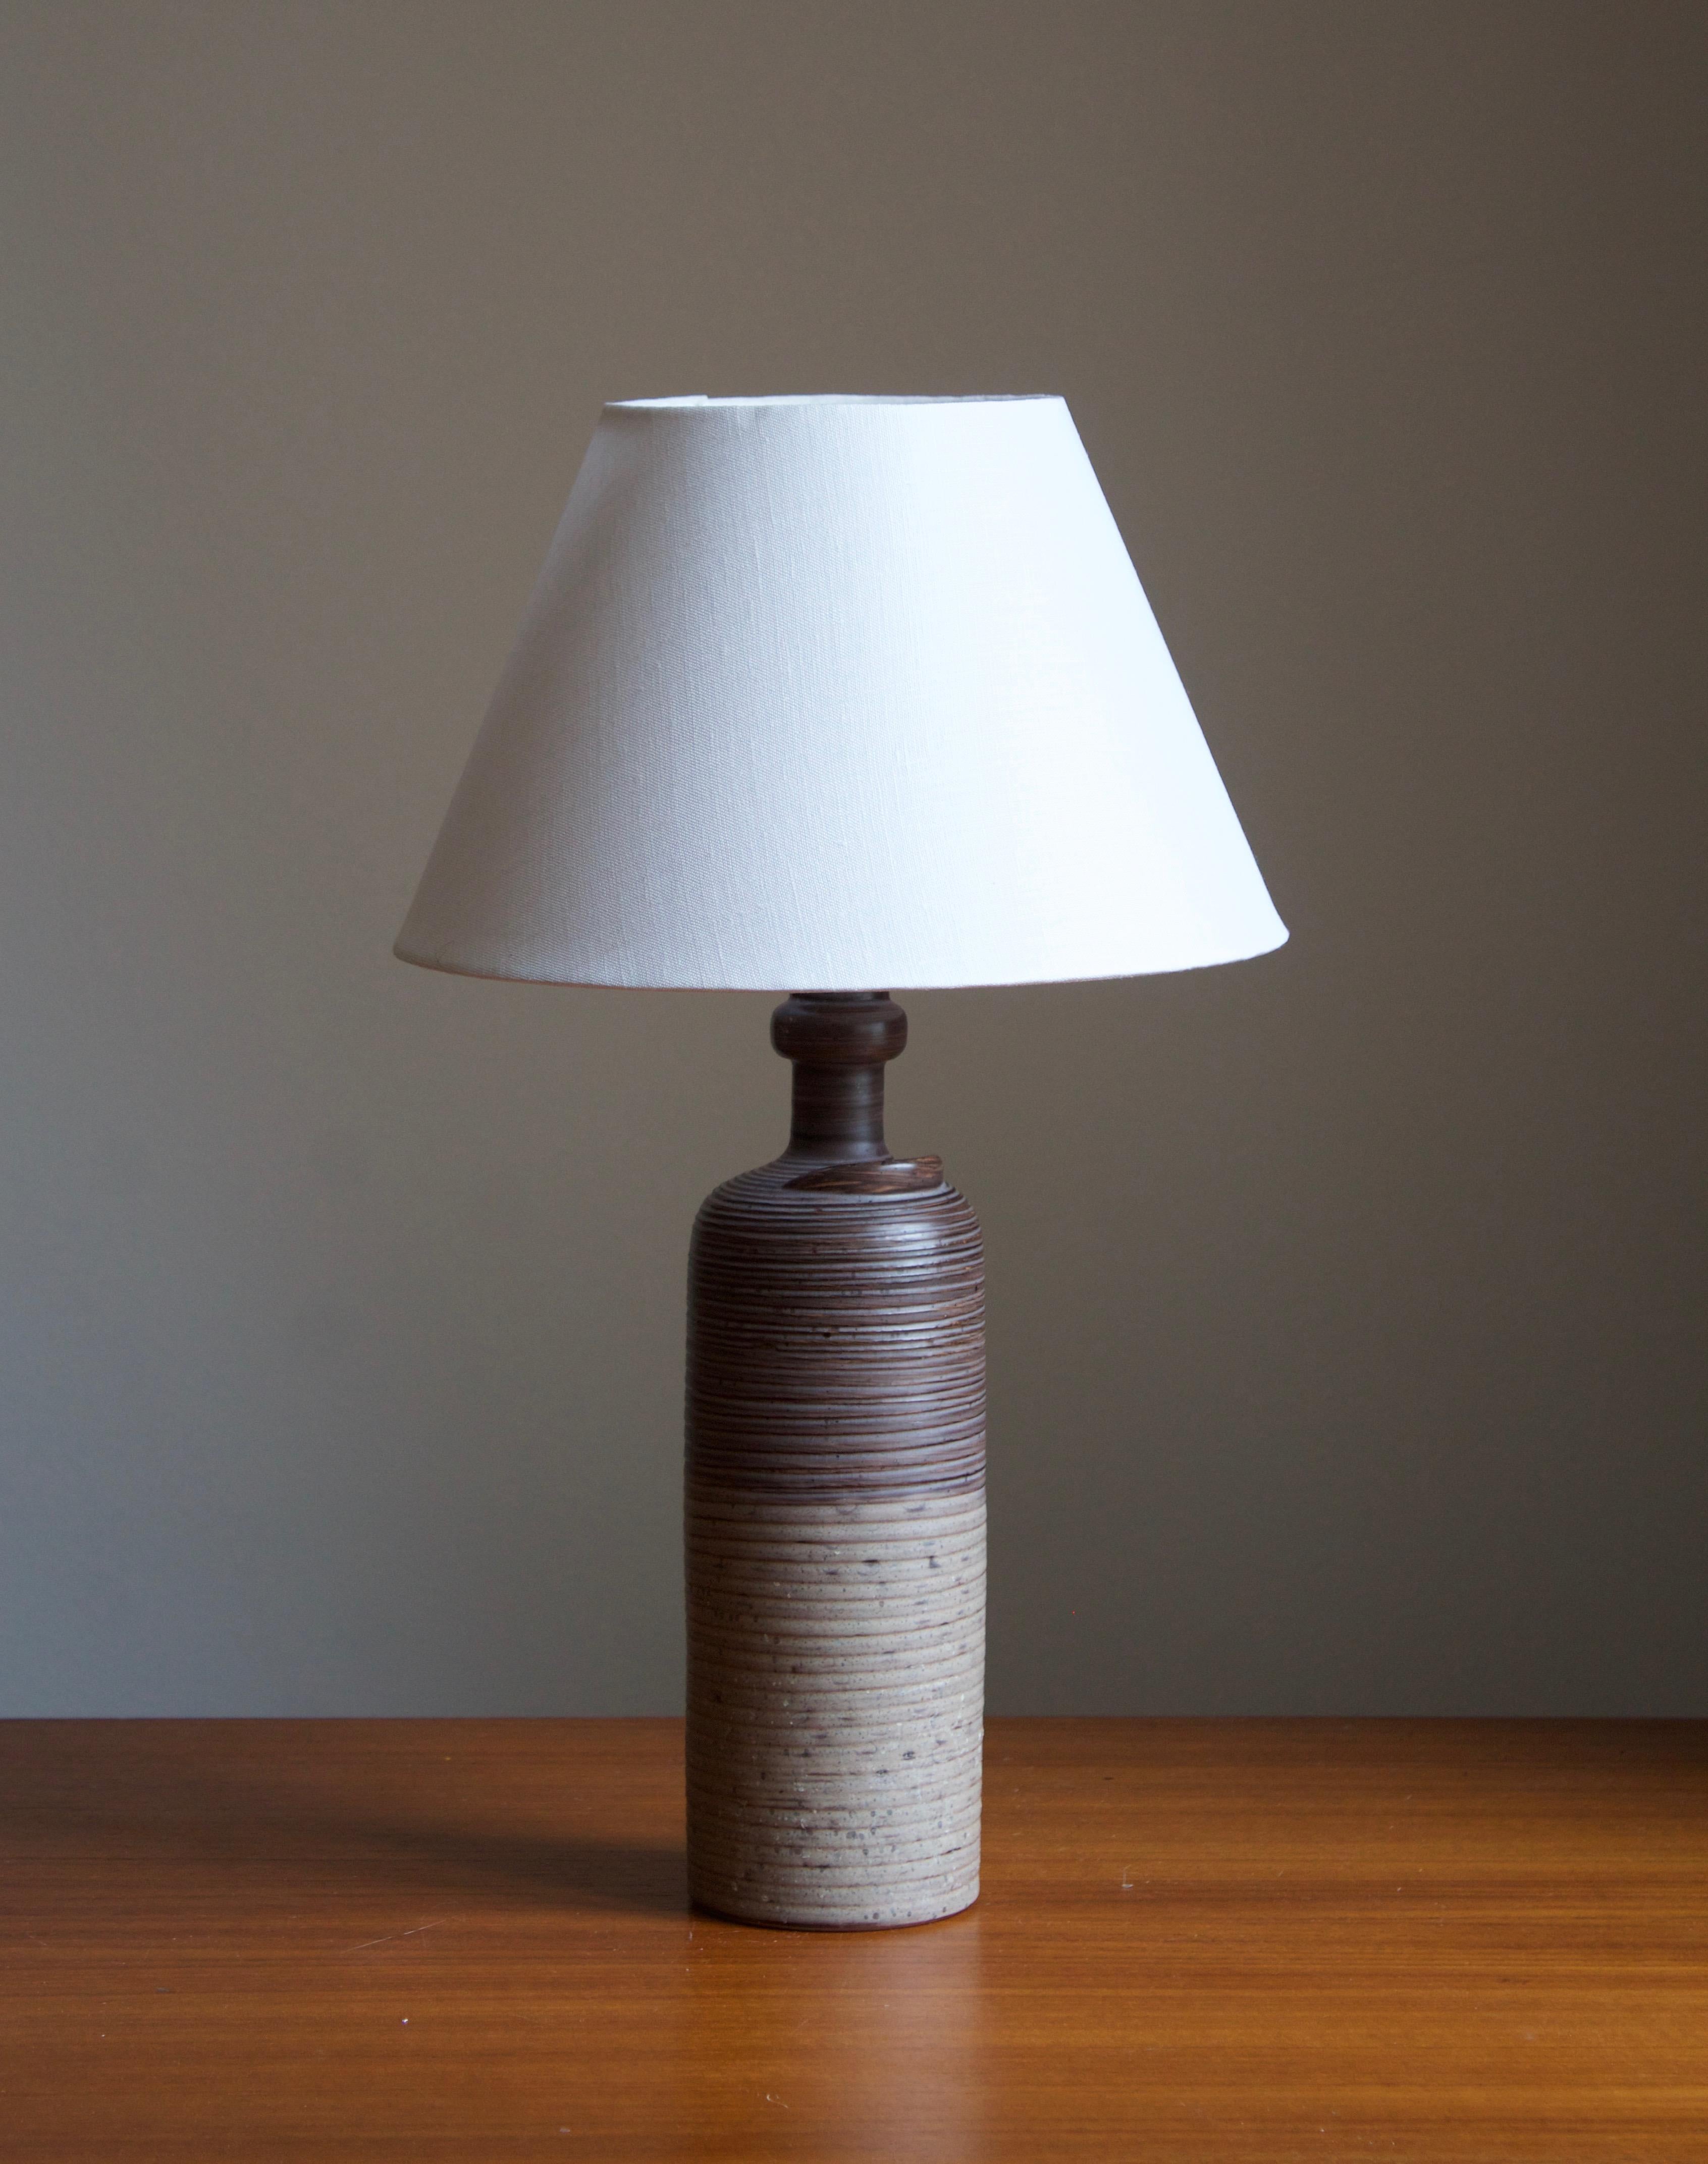 A table lamp designed by Thomas Hellström, produced by Nittsjö, Sweden, c. 1960s.

Features subtle incised decor and a sculptural detail.

Stated dimensions exclude lampshade. Height includes socket. Sold without lampshade.

Glaze features